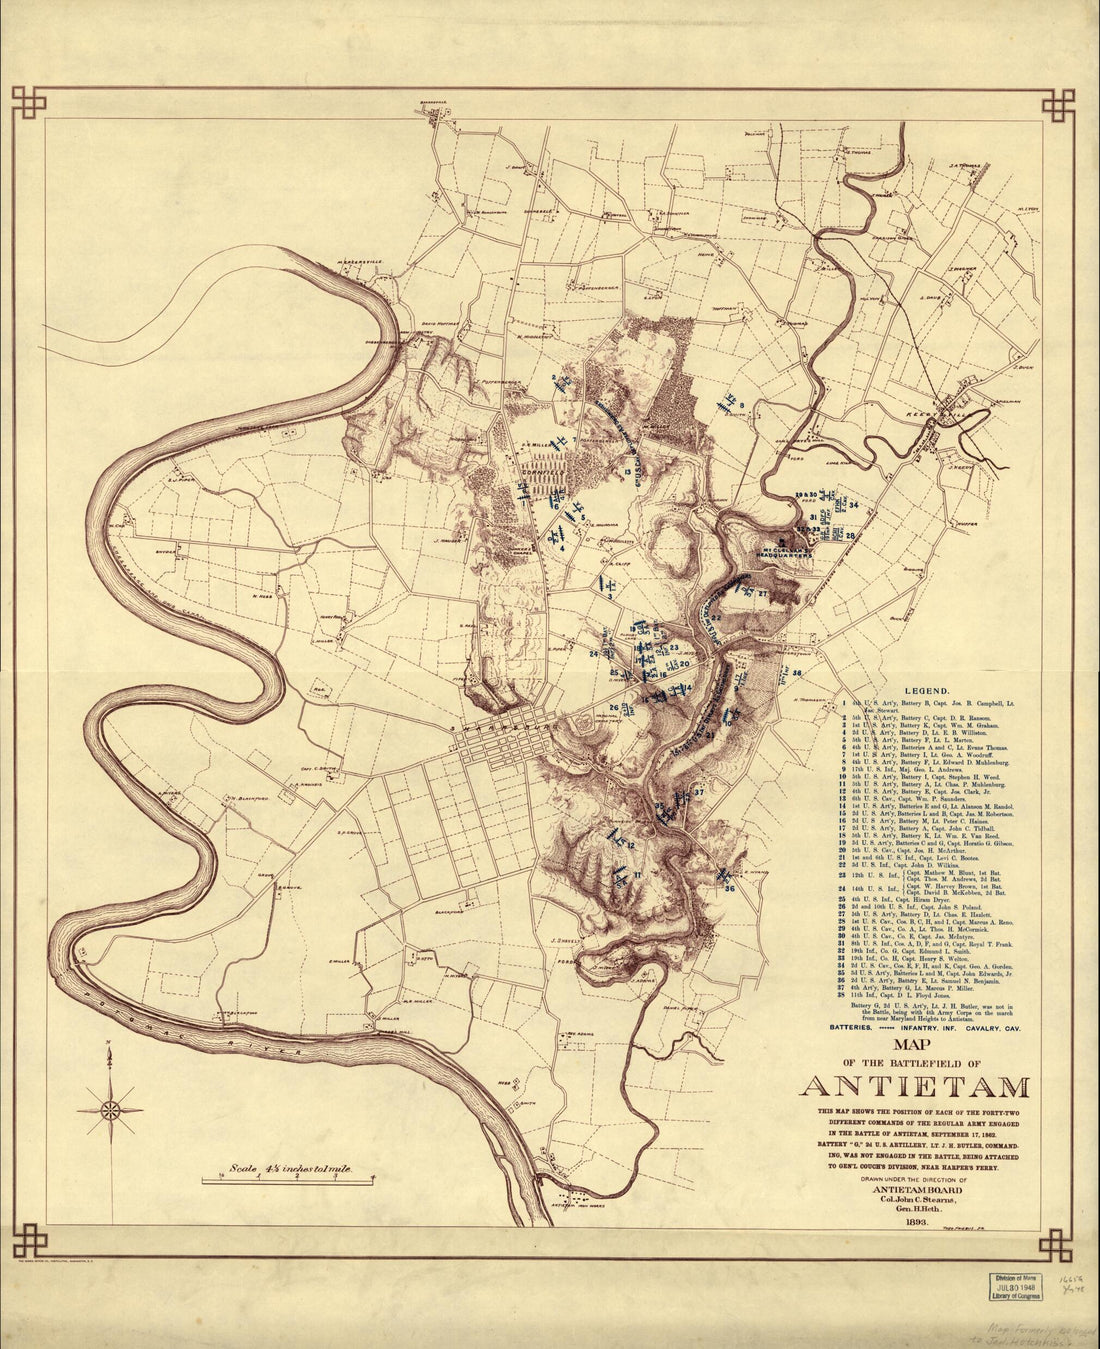 This old map of Two Different Commands of the Regular Army Engaged In the Battle of Antietam, September 17, 1862. Battery G, 2d U.S. Artillery, Lt. J. H. Butler, Commanding, Was Not Engaged In the Battle, Being Attached to Gen&